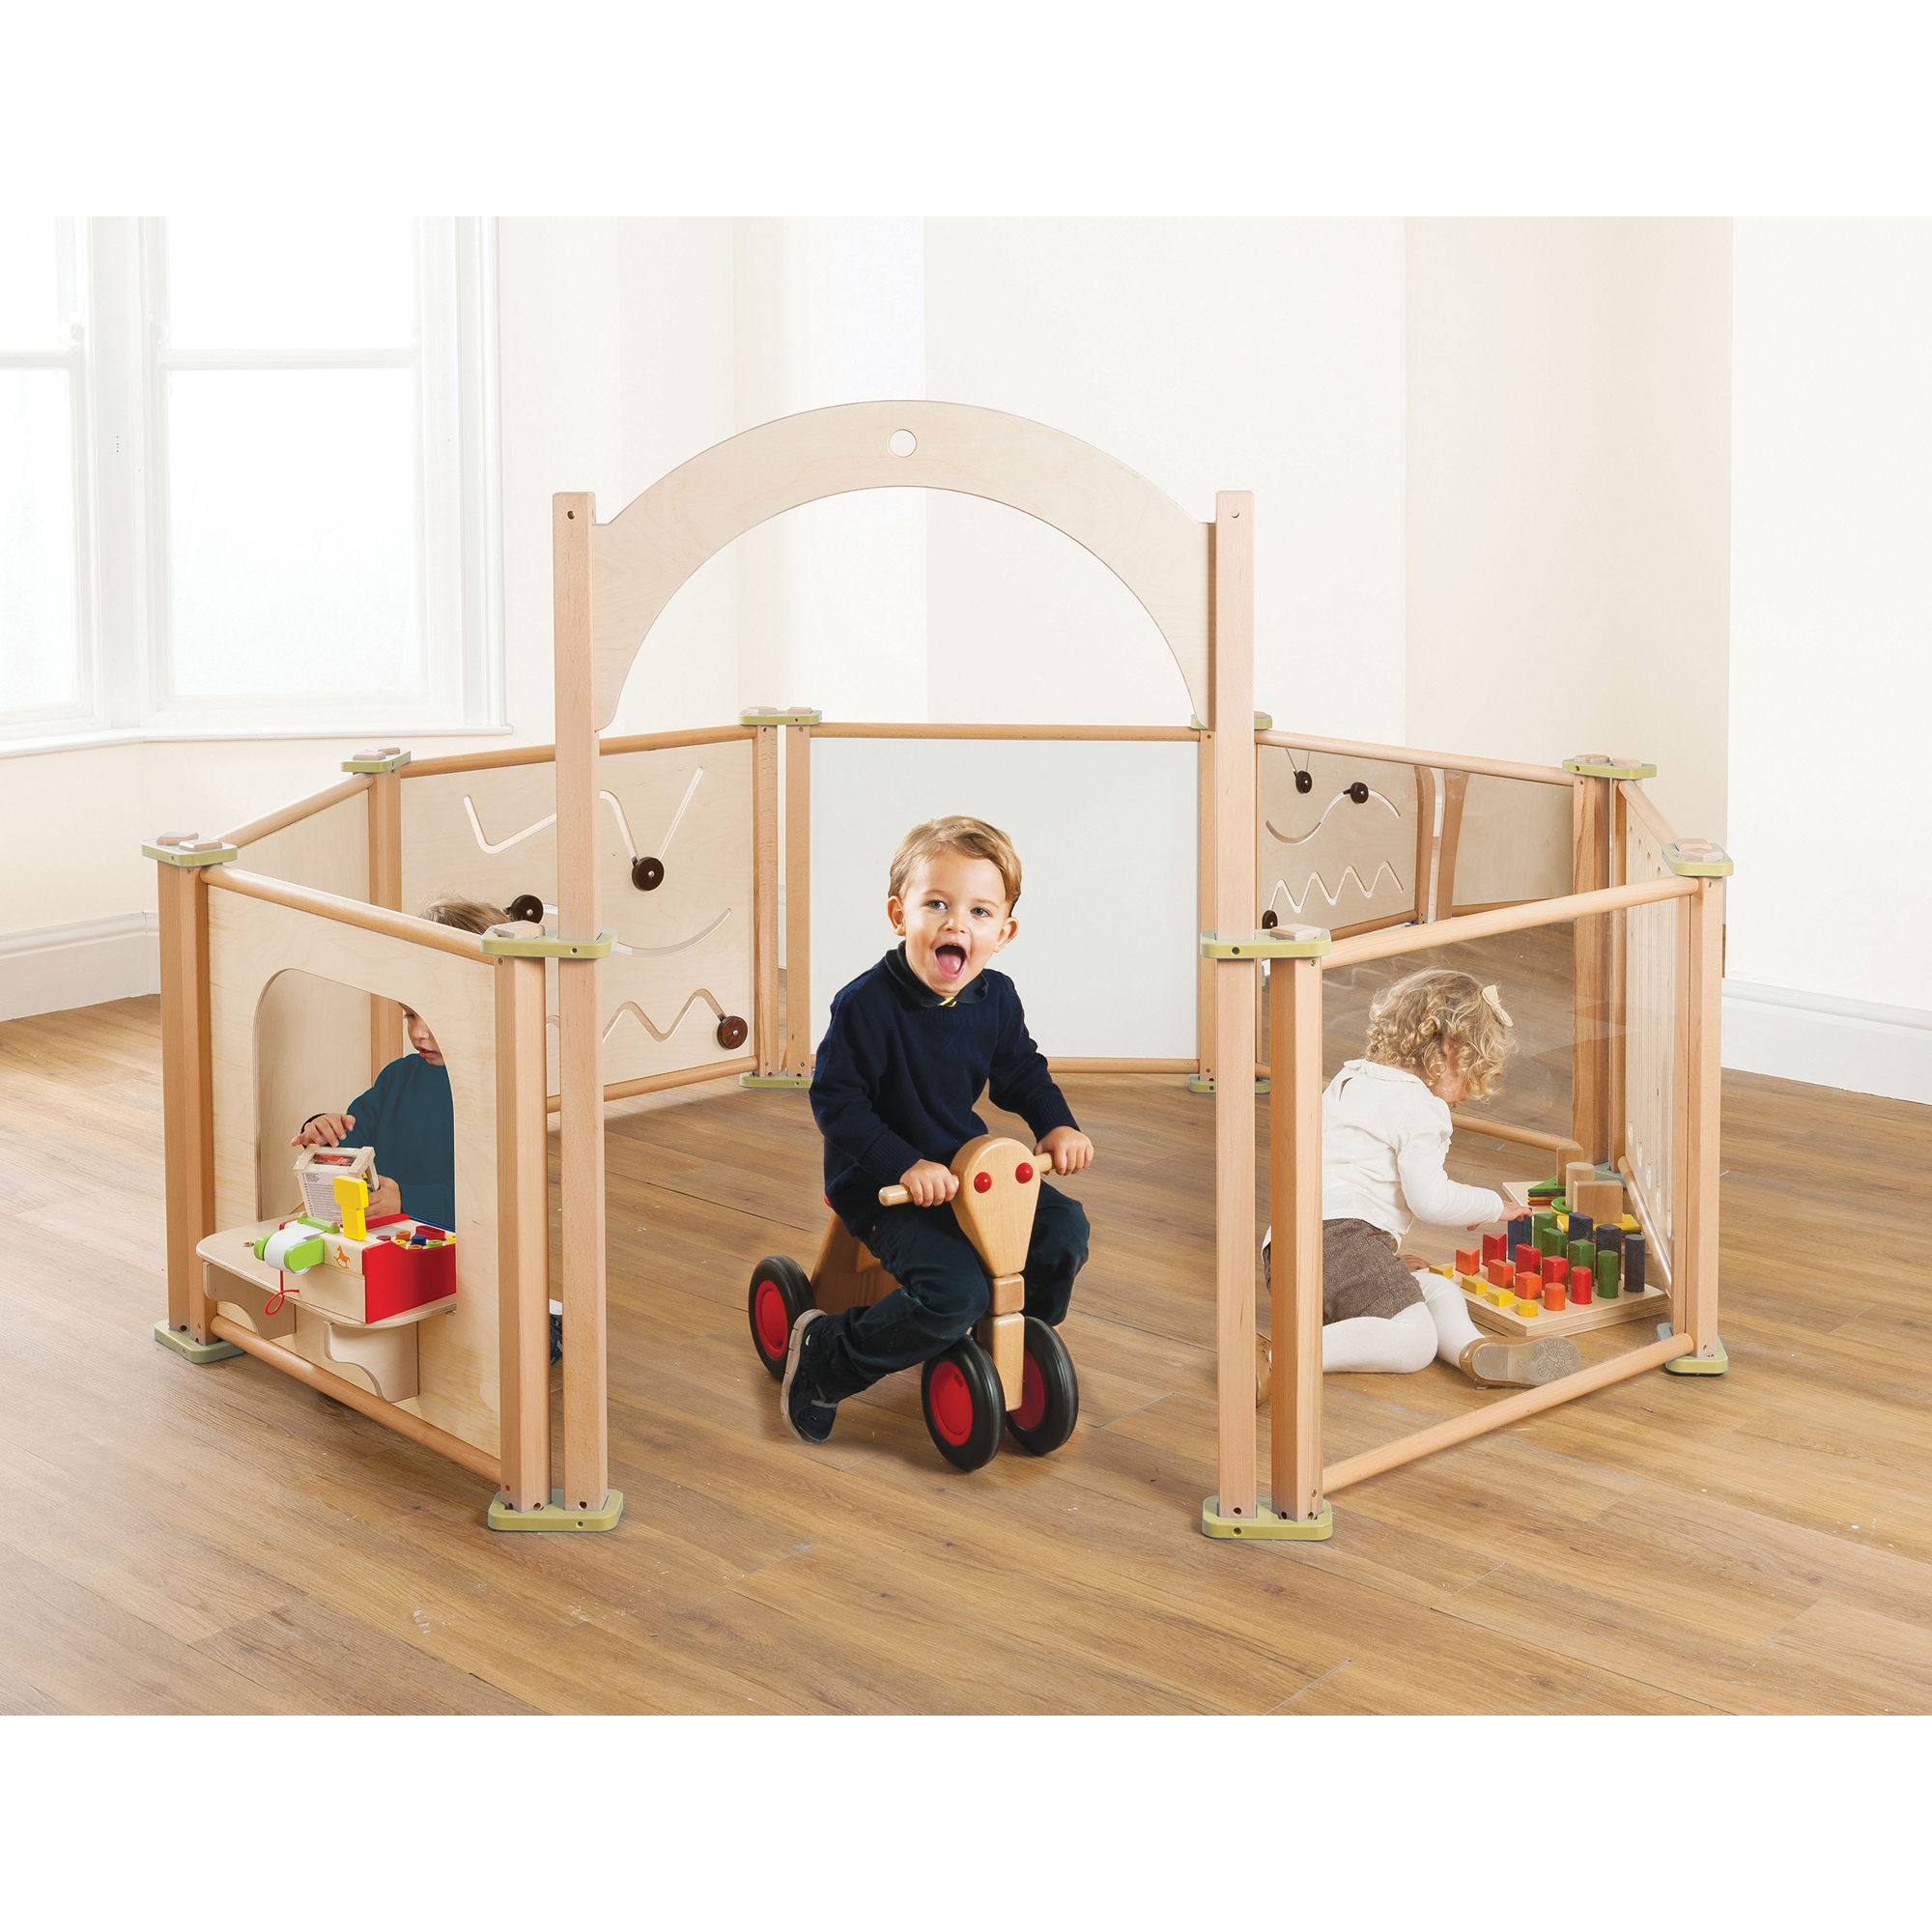 Room Dividers & Play Panels